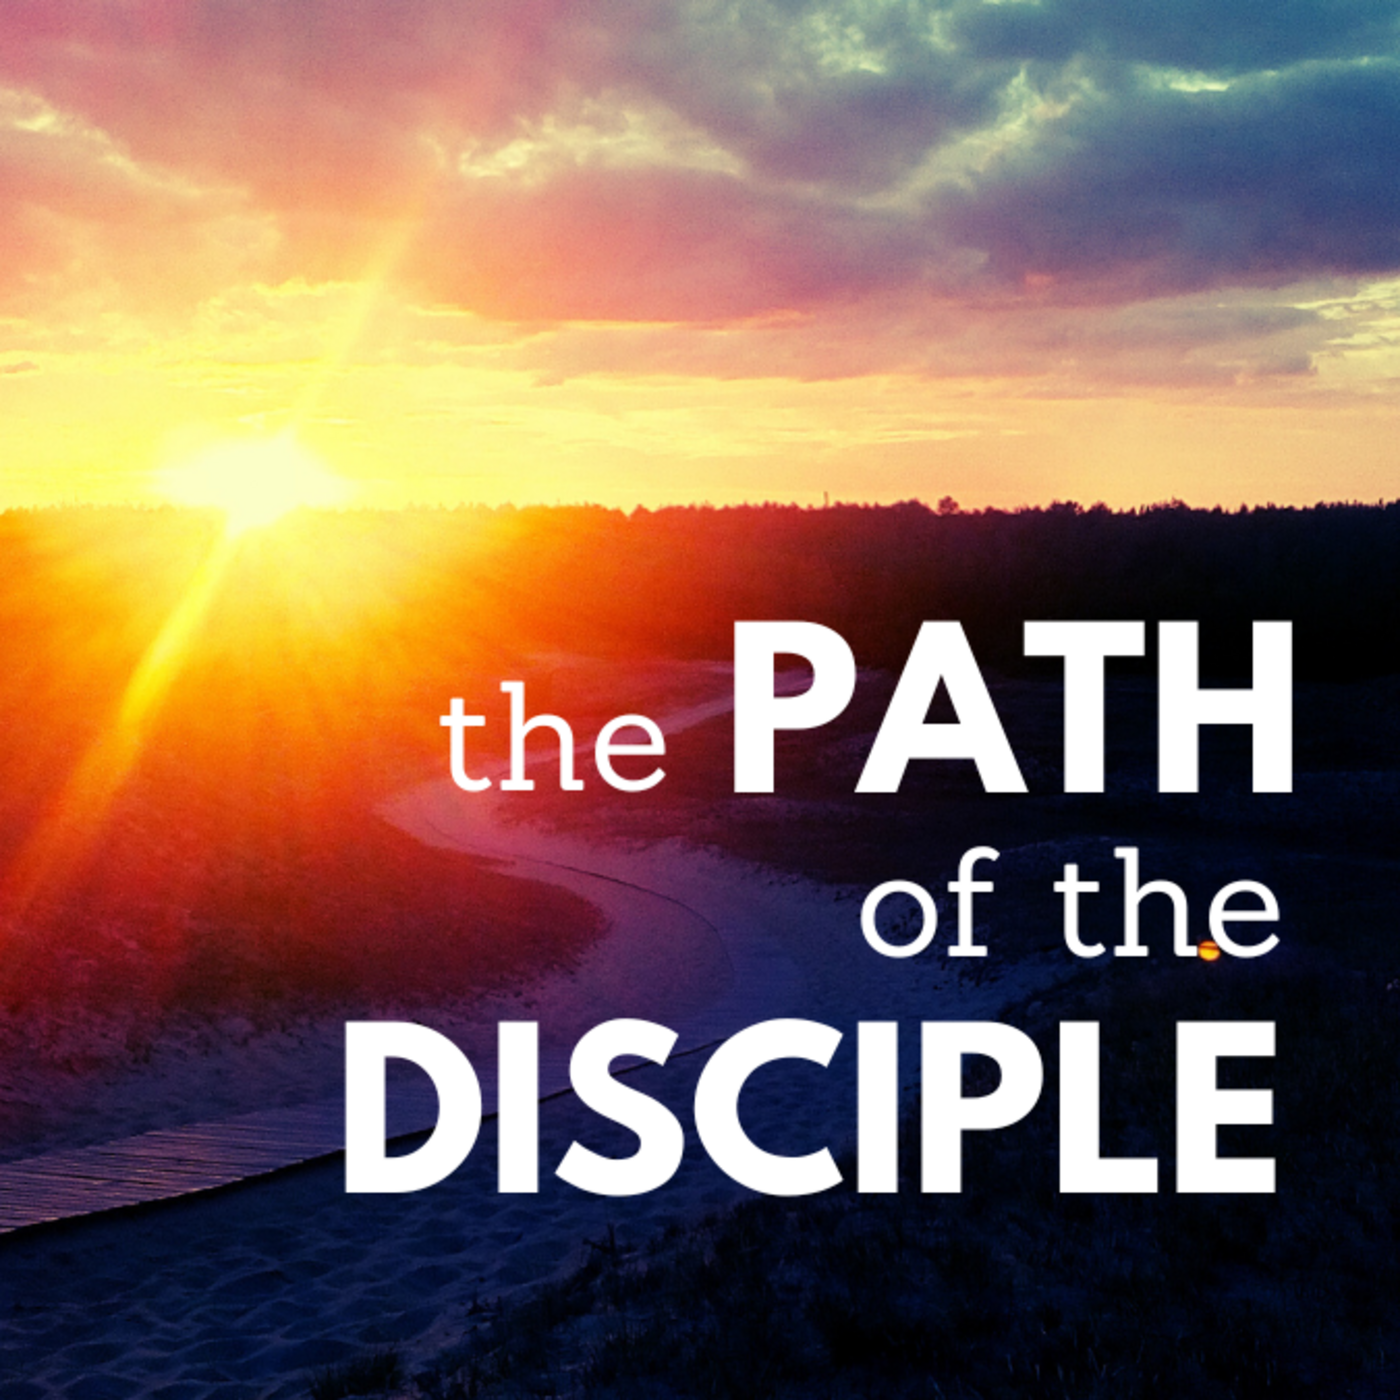 Episode 194: The Path of the Disciple - is like